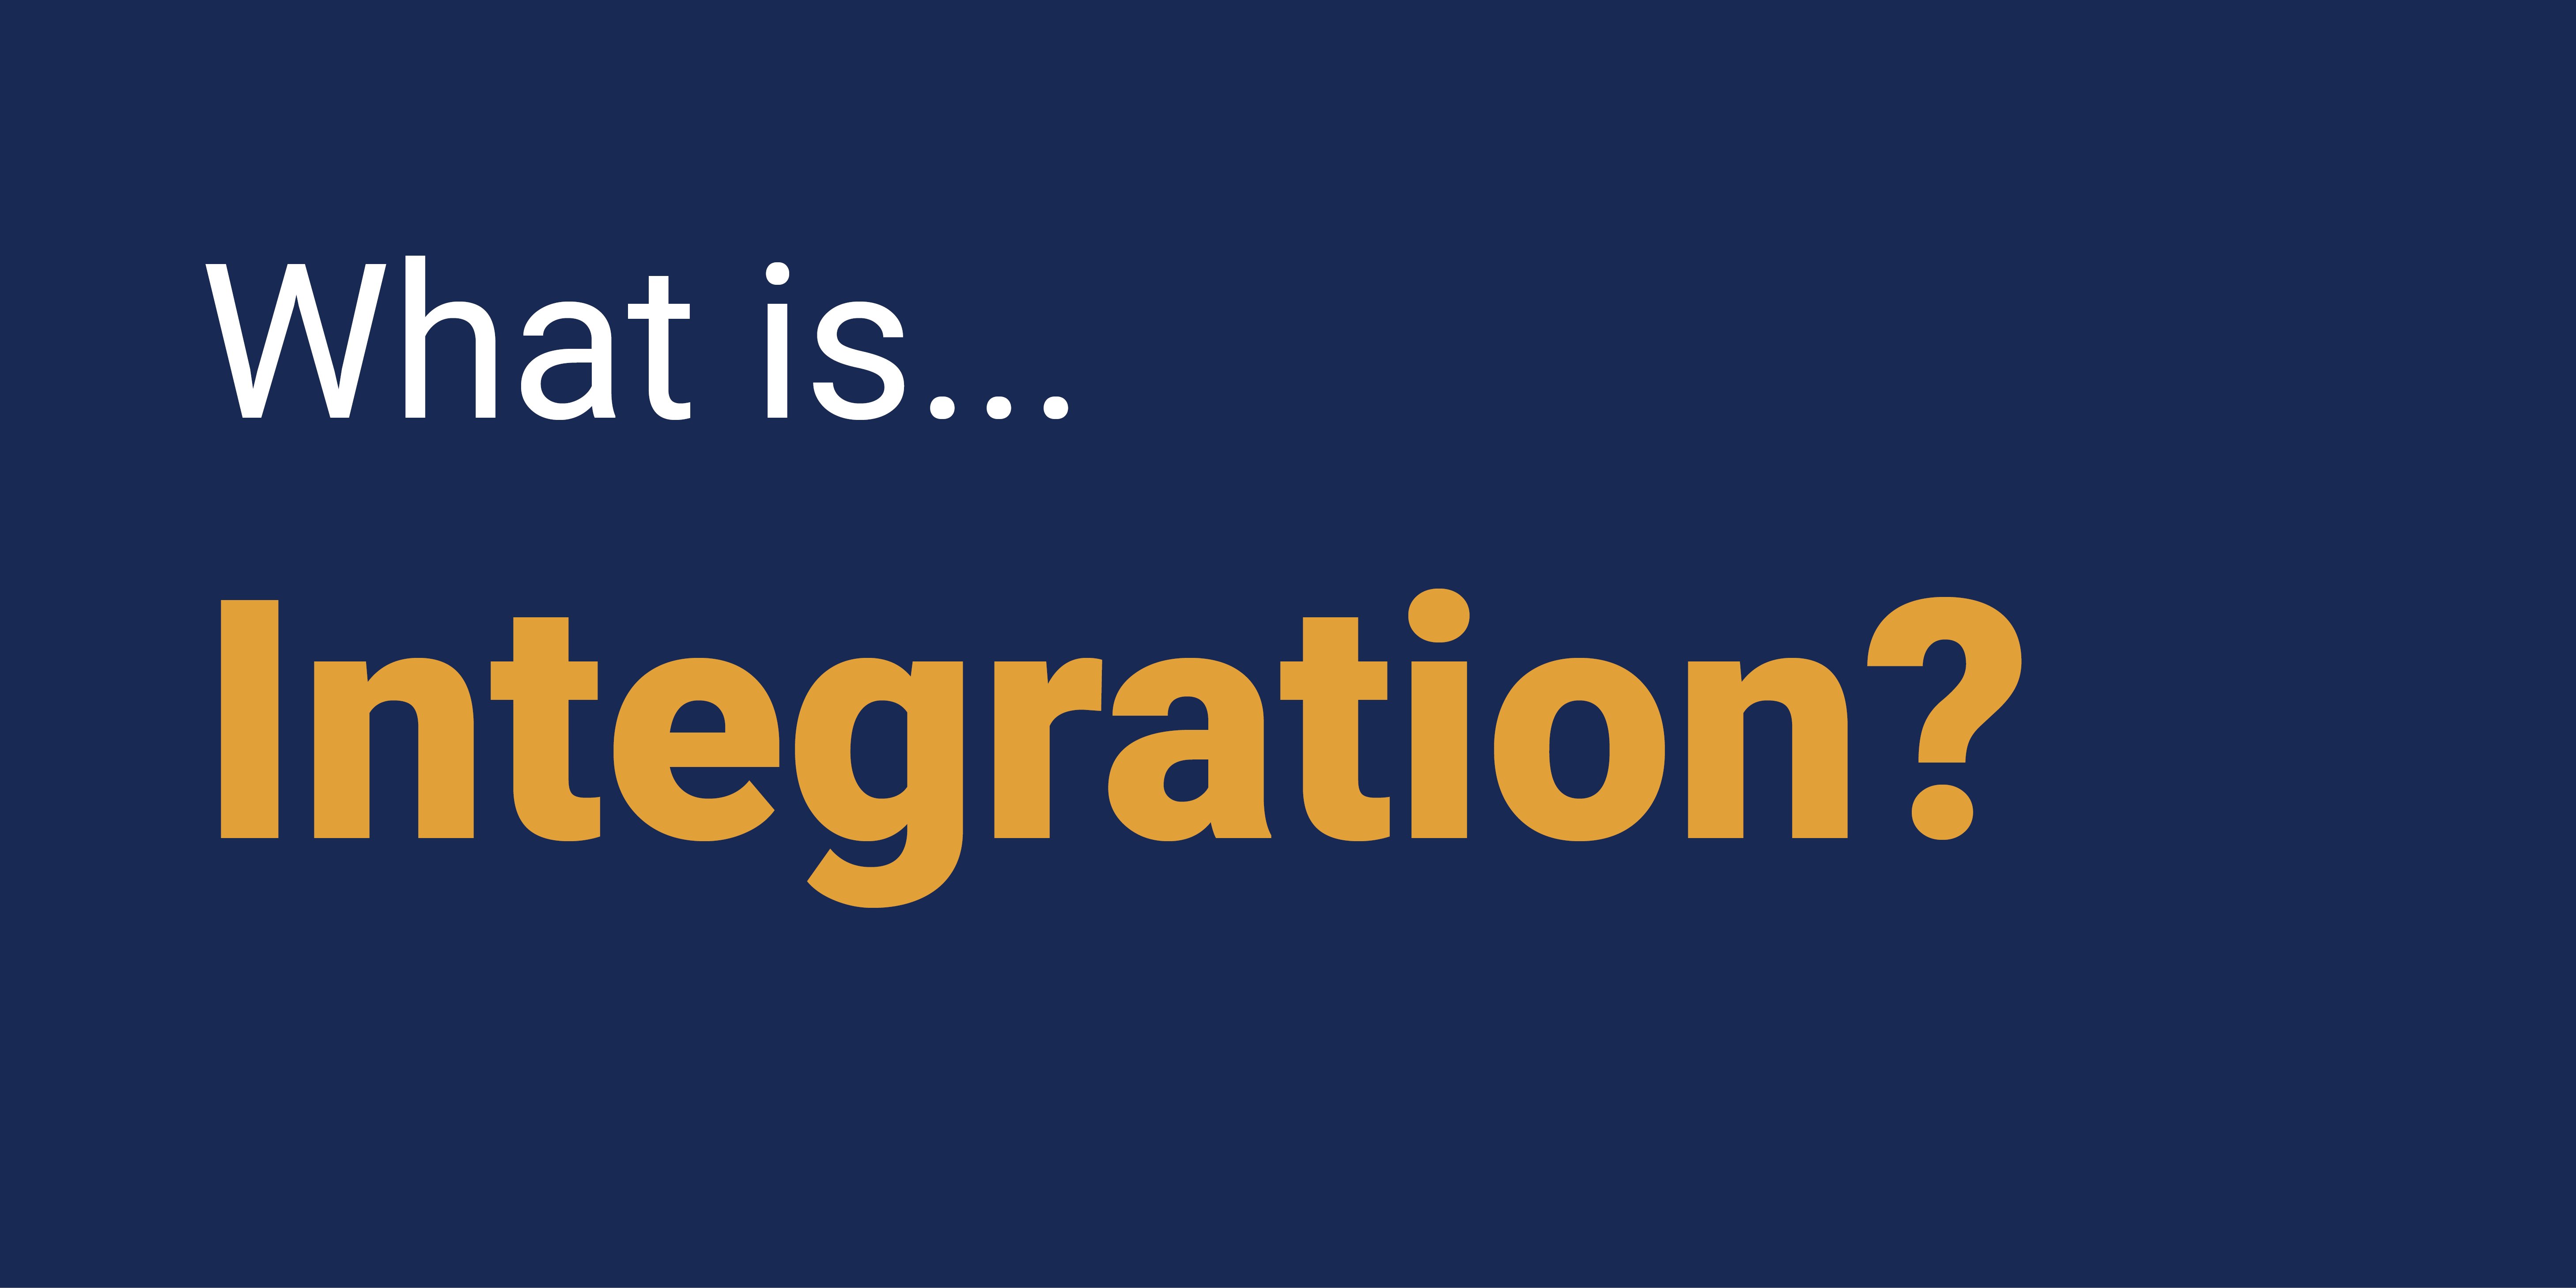 What is Integration?